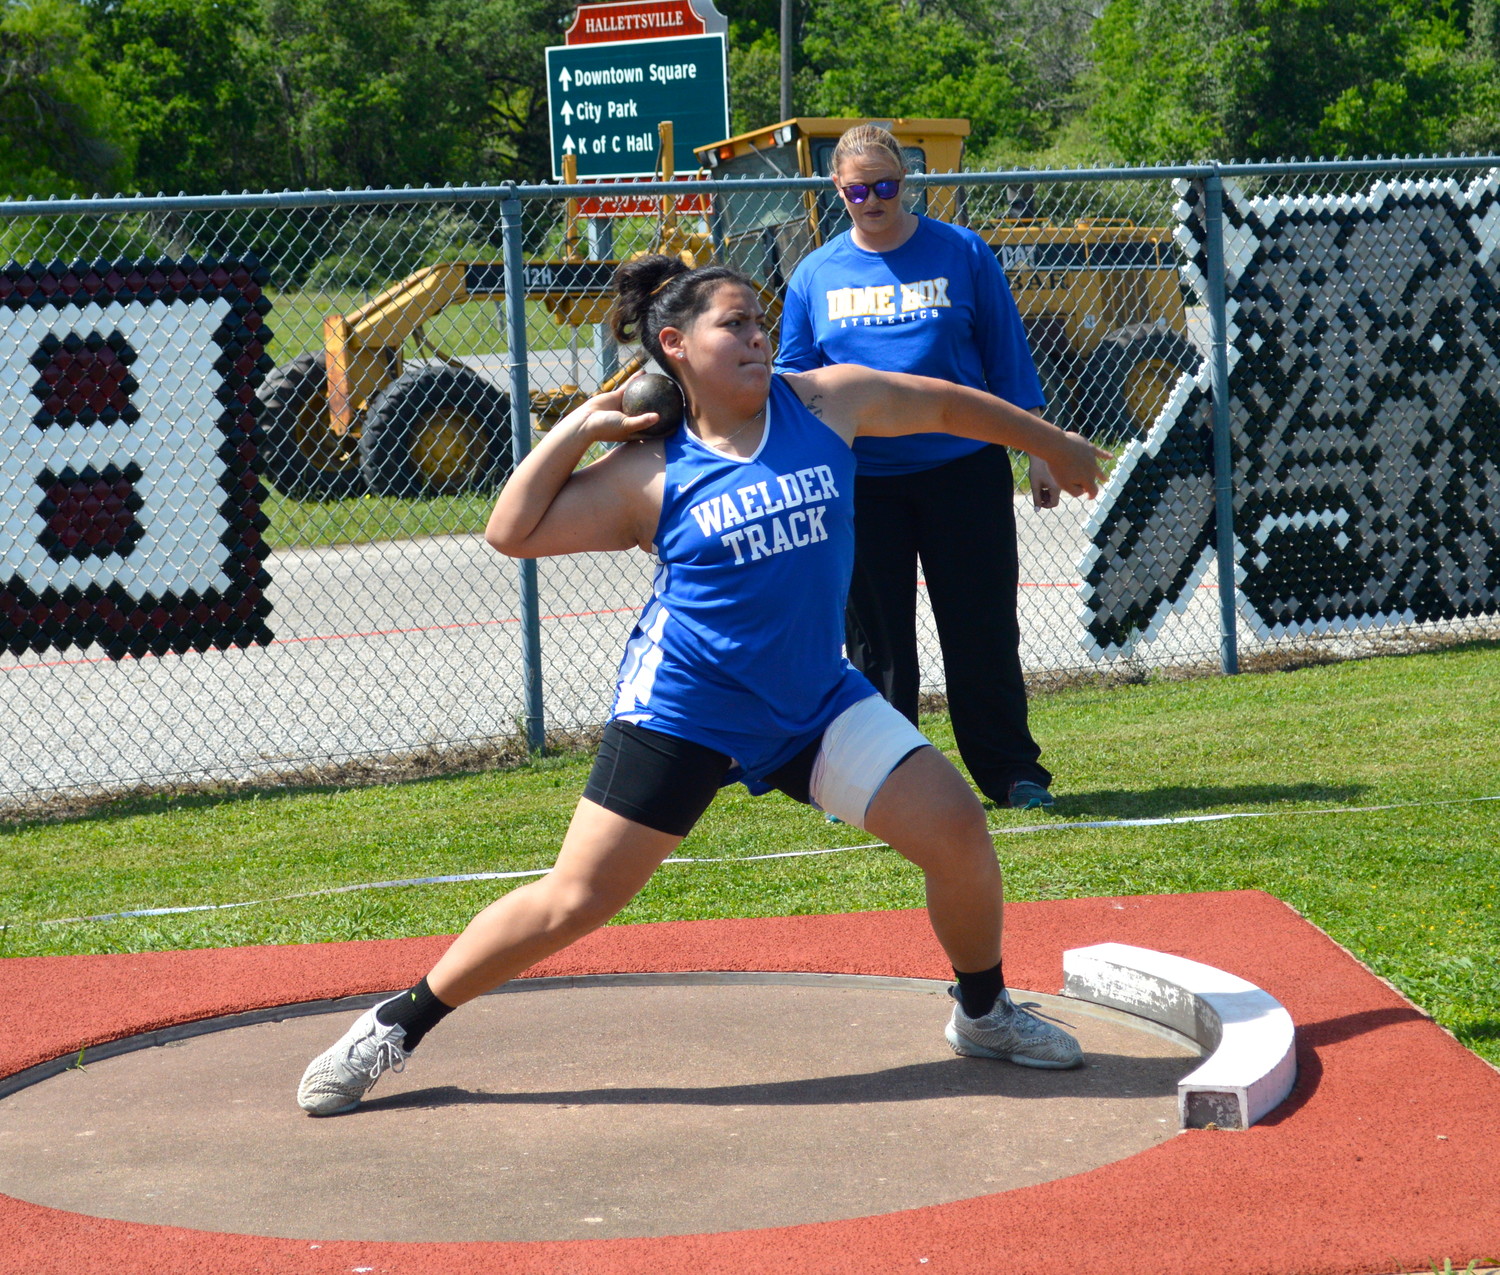 Malorie Puente (pictured) was one of three athletes who won gold at the District 30-1A track meet last week. Aquria Fields and Isaiah Miller Jones also took gold in their events.